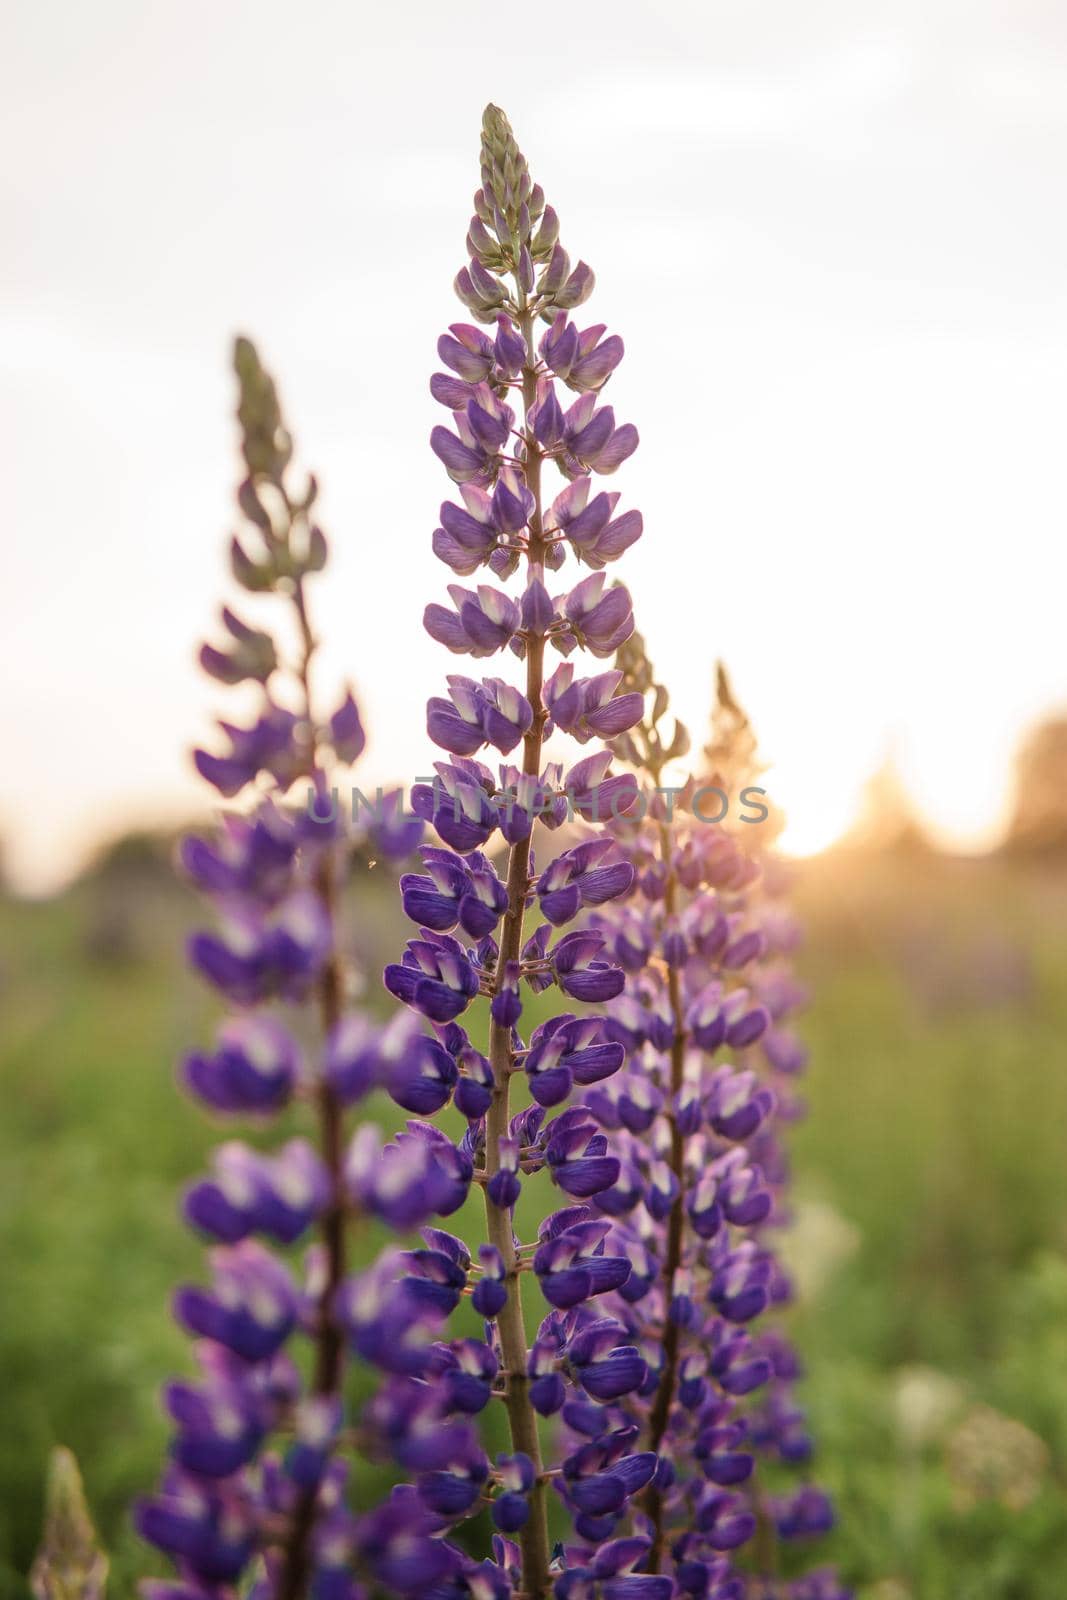 photos of lupine flowers in nature by Annu1tochka